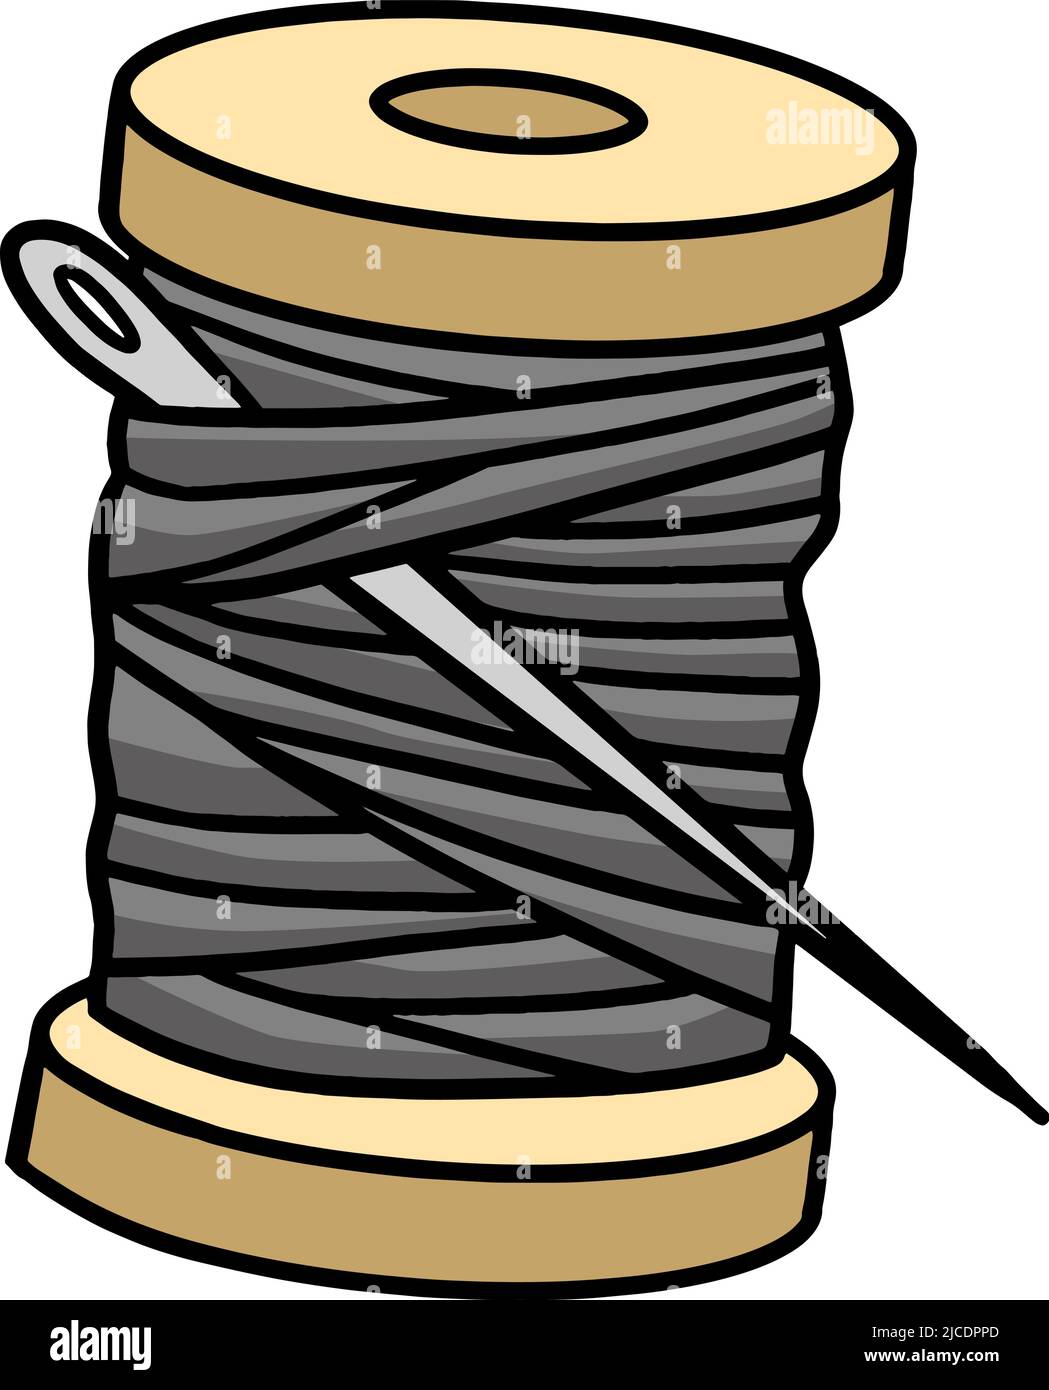 Vector illustration of a spool of orange thread and a sewing